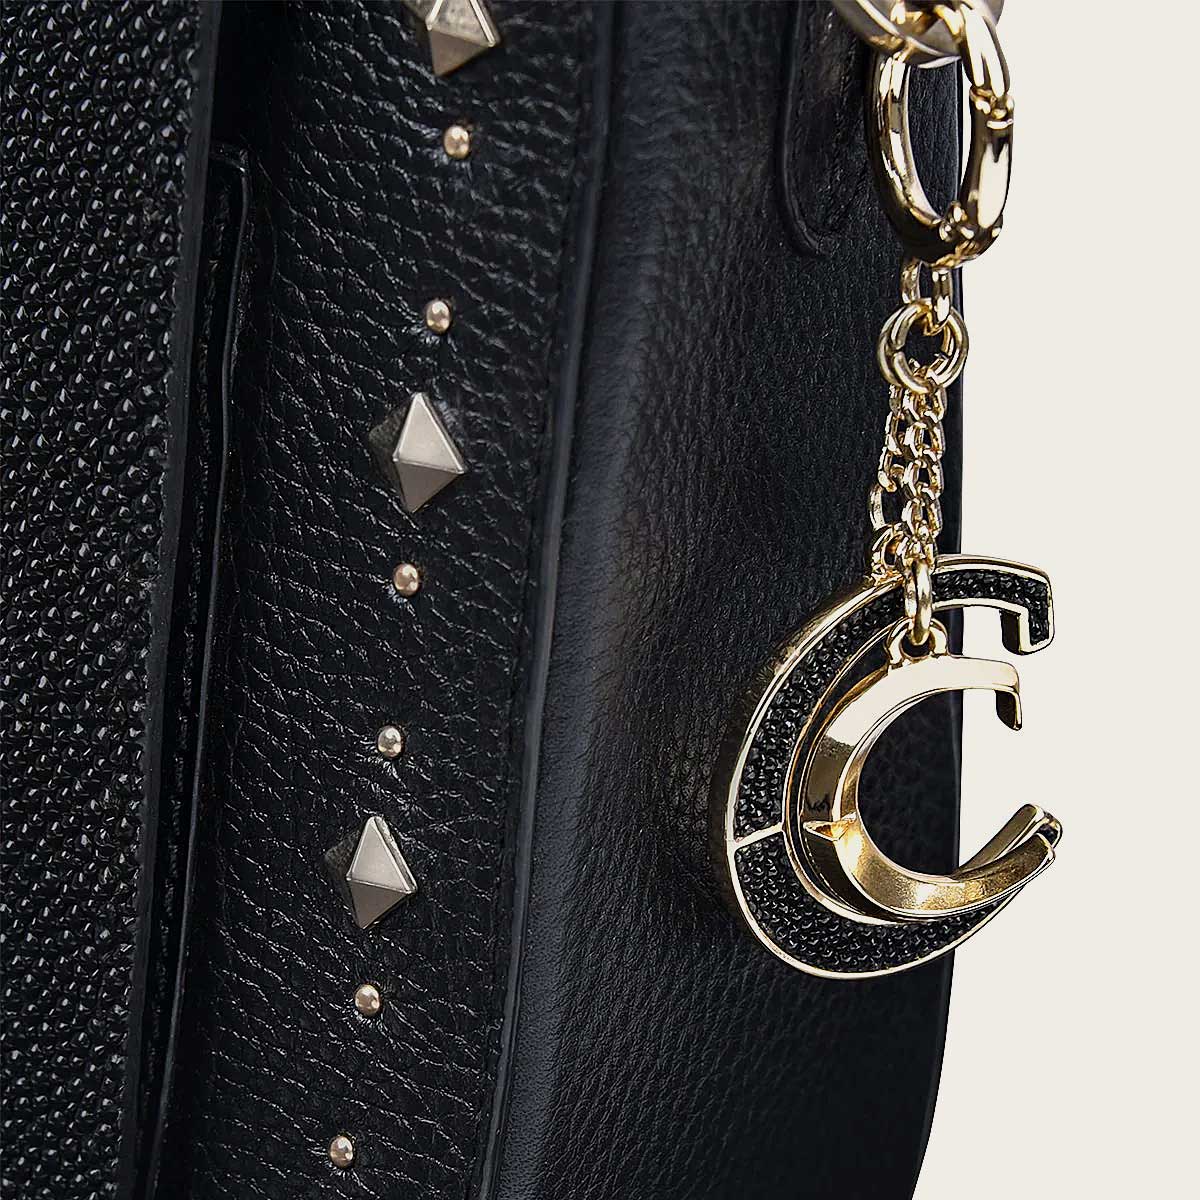 Elevate your style with this black handbag crafted from genuine stingray leather, adorned with studs for a chic and edgy look.